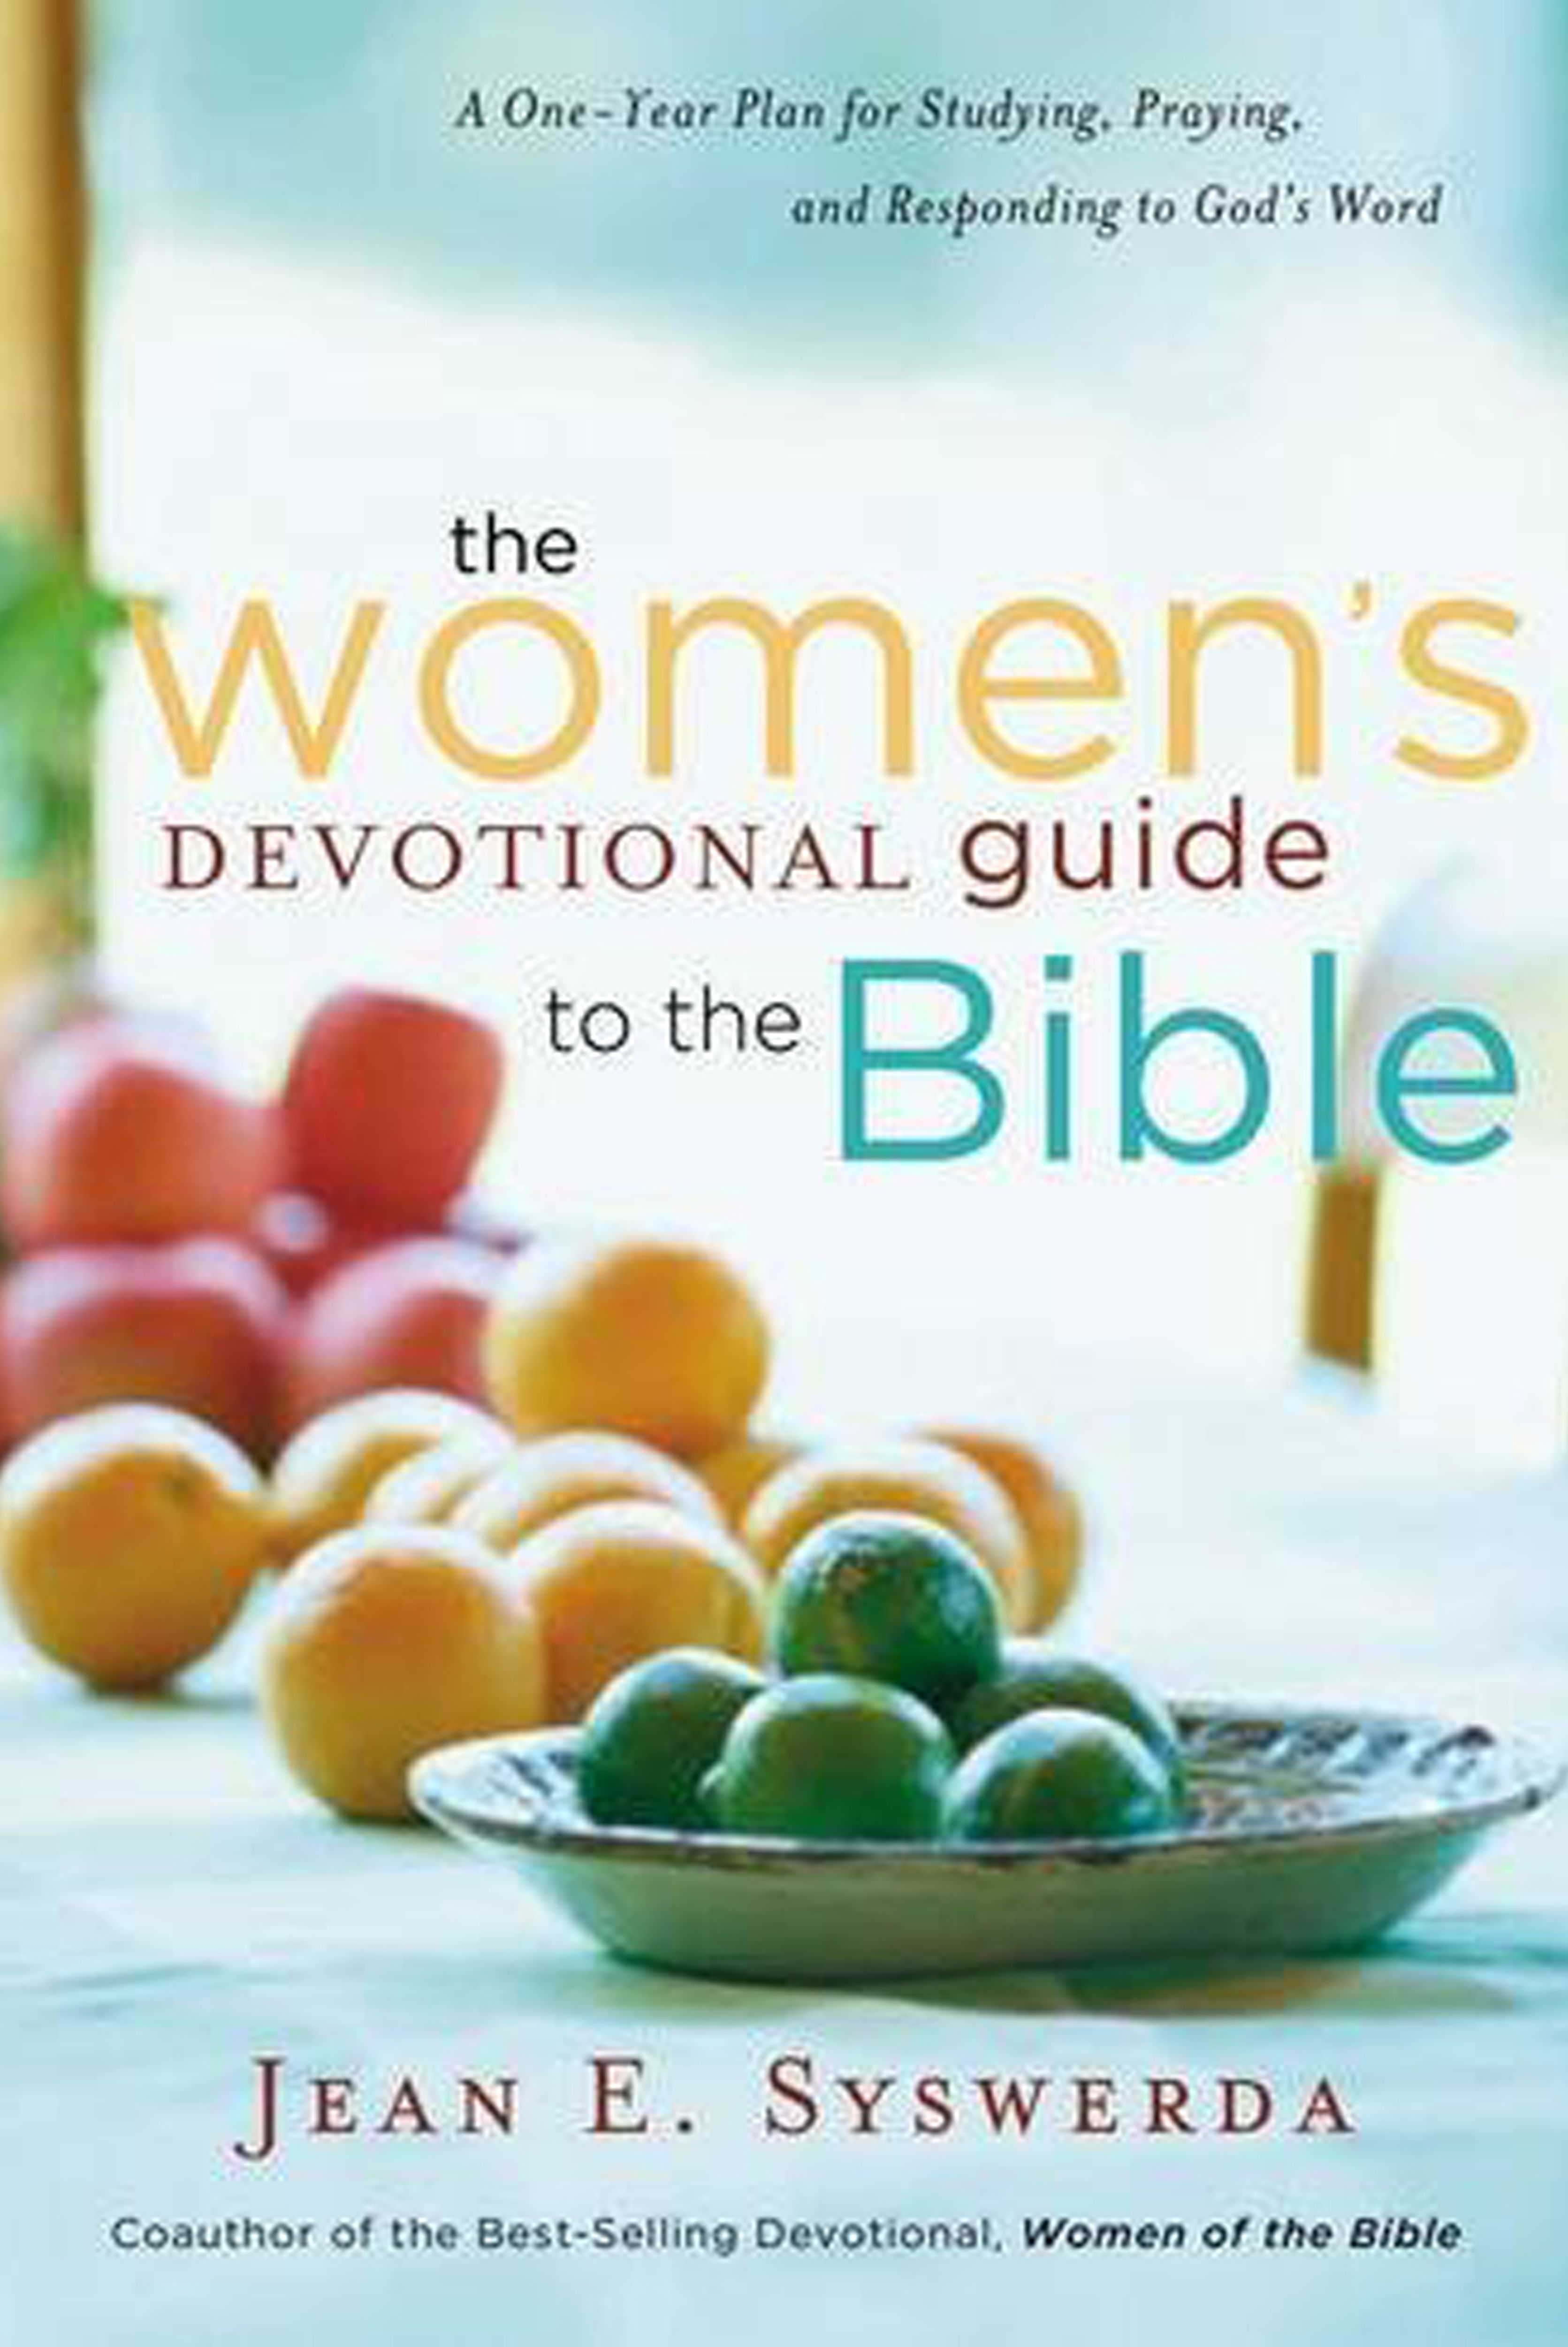 Daily Devotional Books For Women 15 Best Daily Devotionals For Women